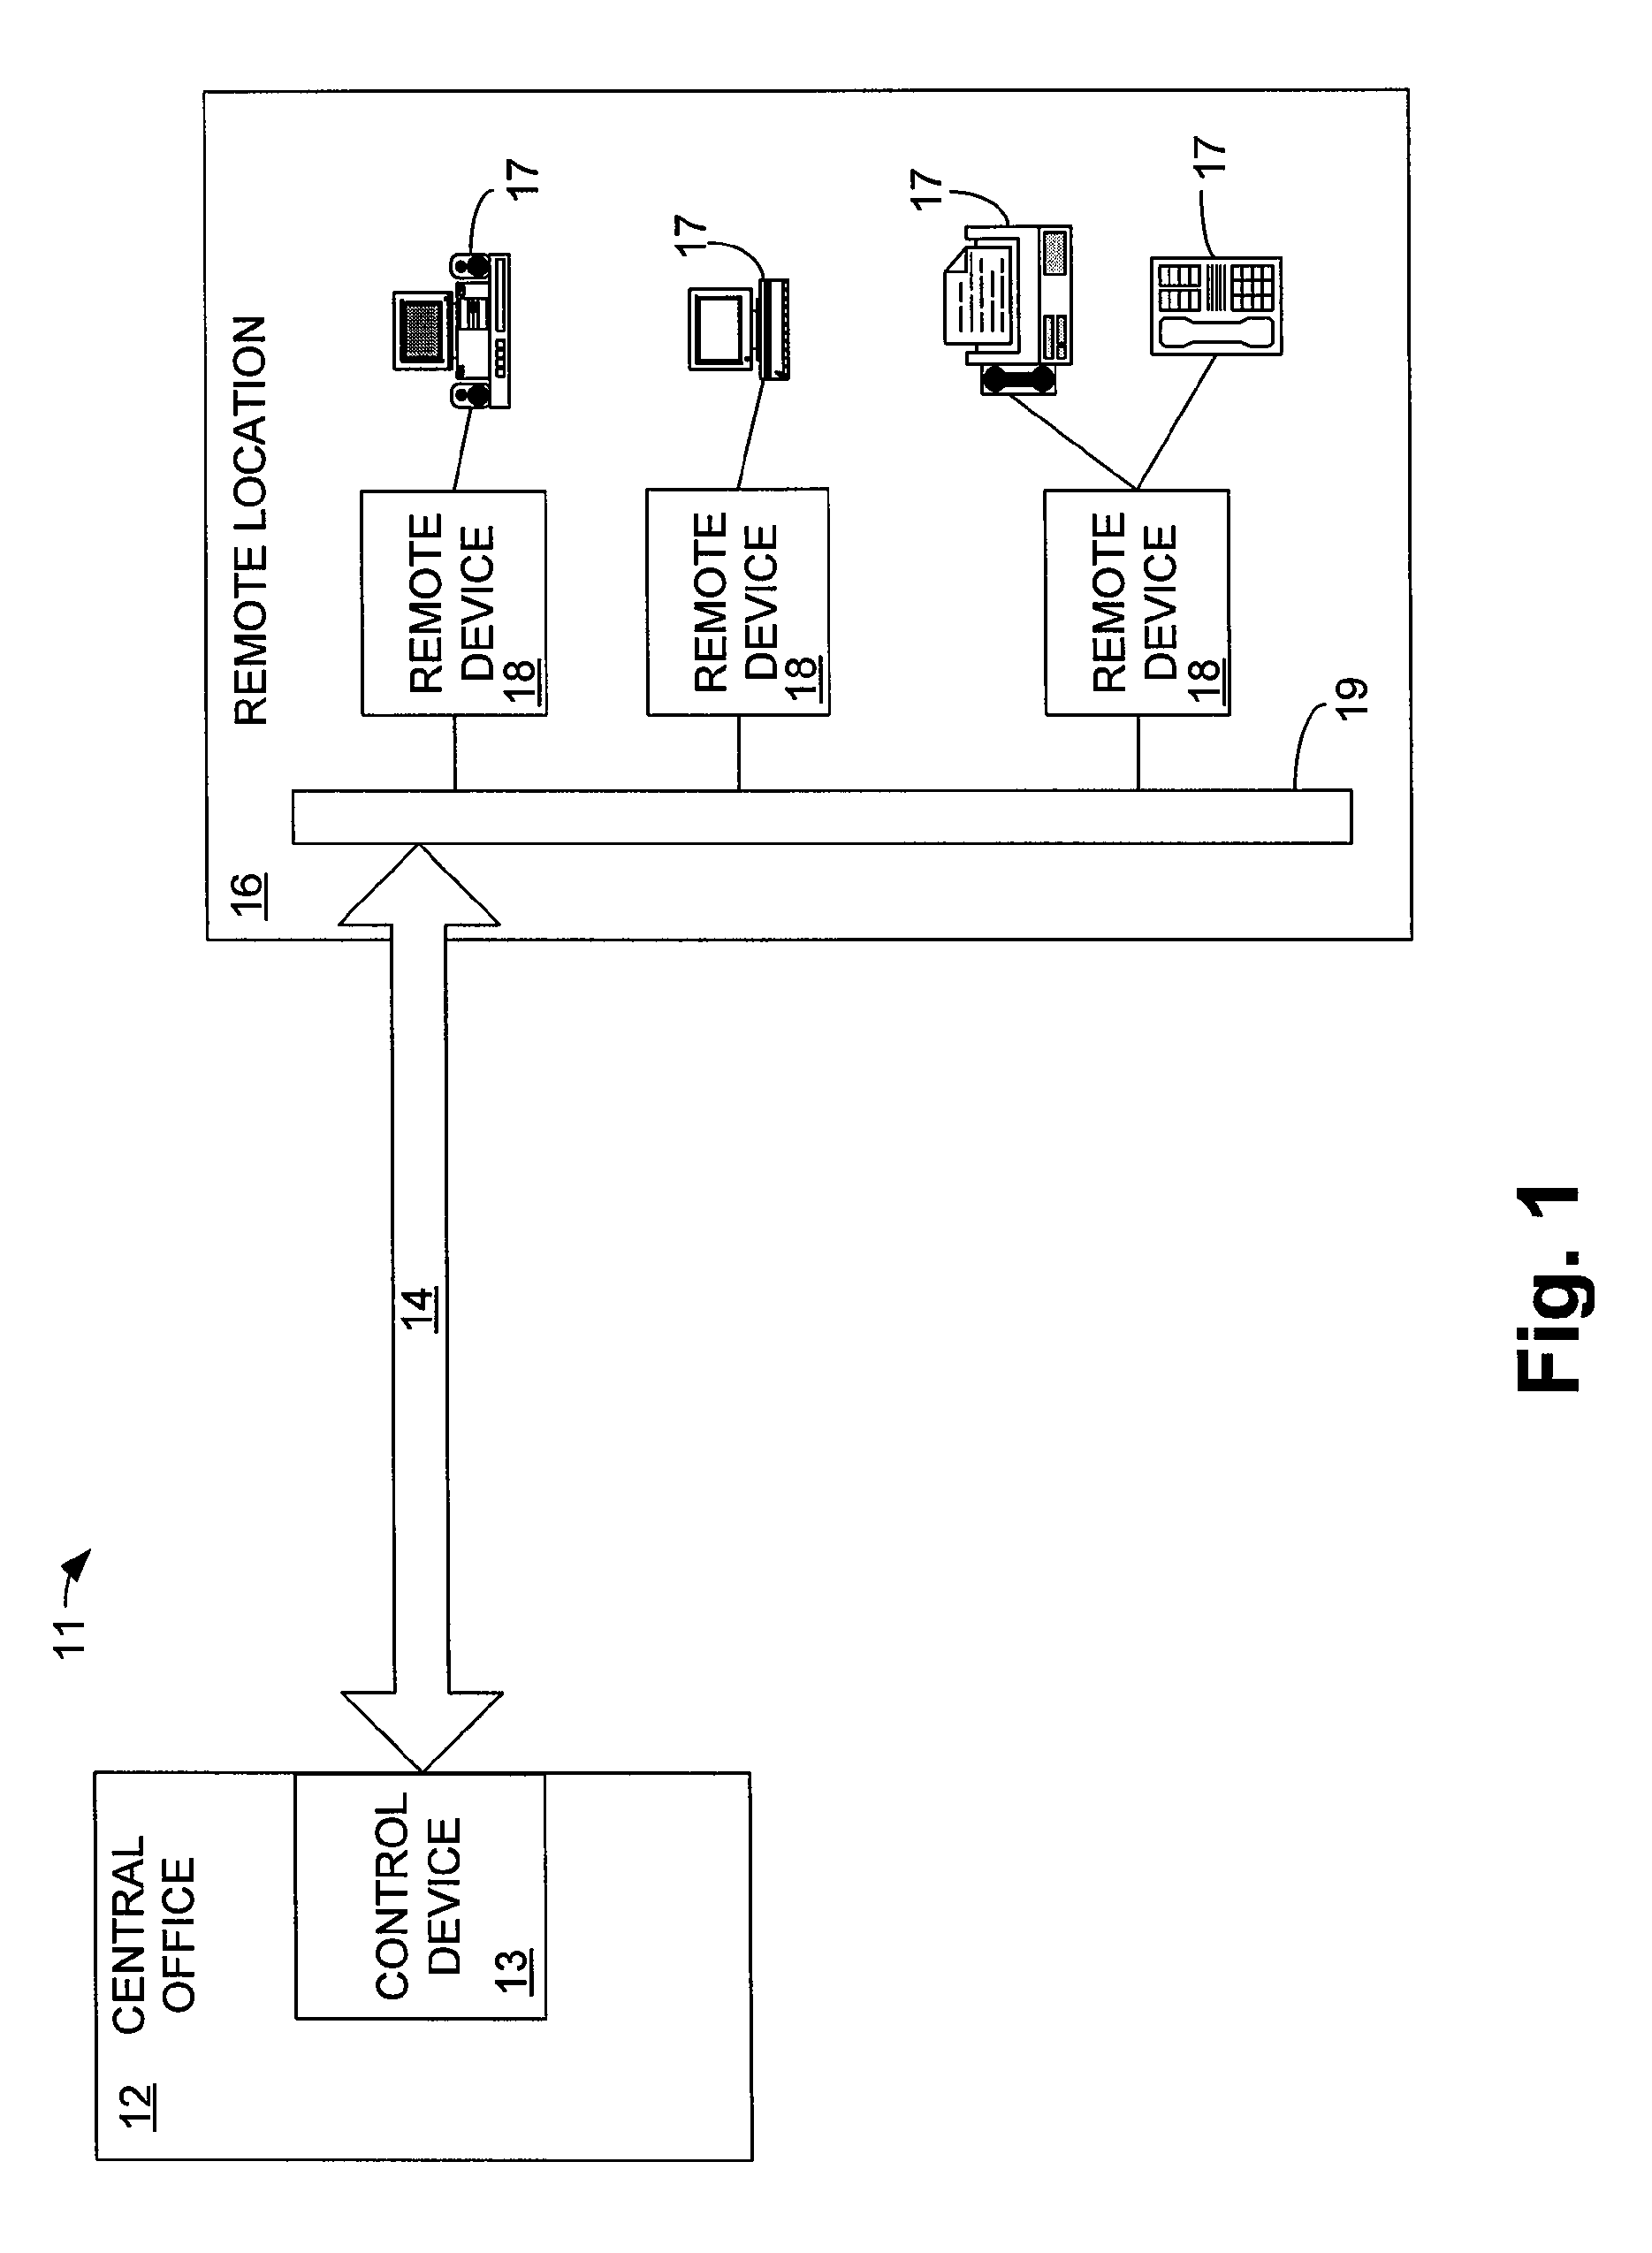 Apparatus and Method to Allow a Frame Check Sequence to Determine the Updating of Adaptive Receiver Parameters of a High Speed Communication Device